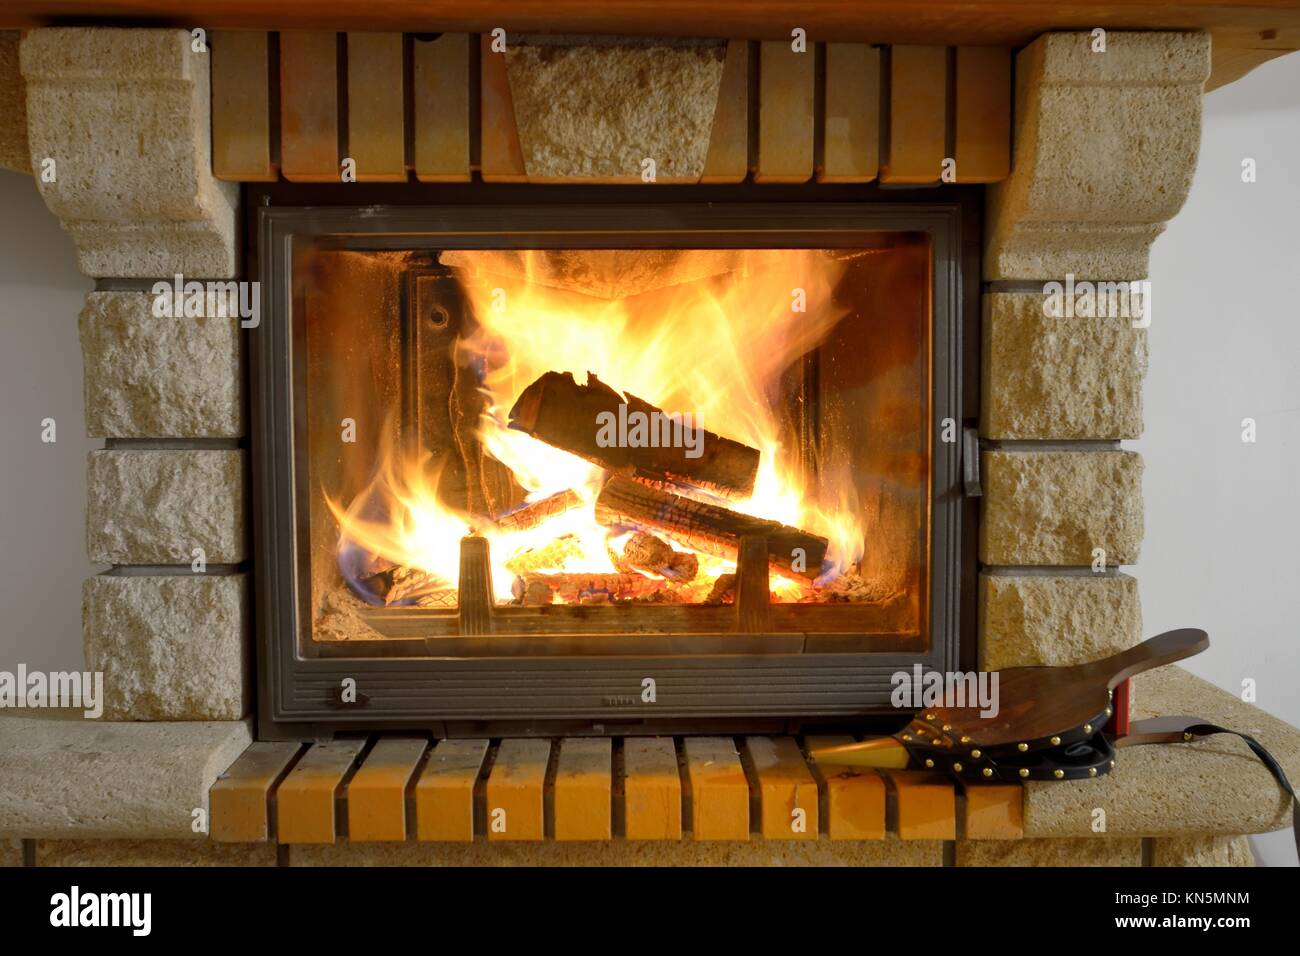 Bad luck earthquake Exquisite Modern Fireplace Close Up High Resolution Stock Photography and Images -  Alamy